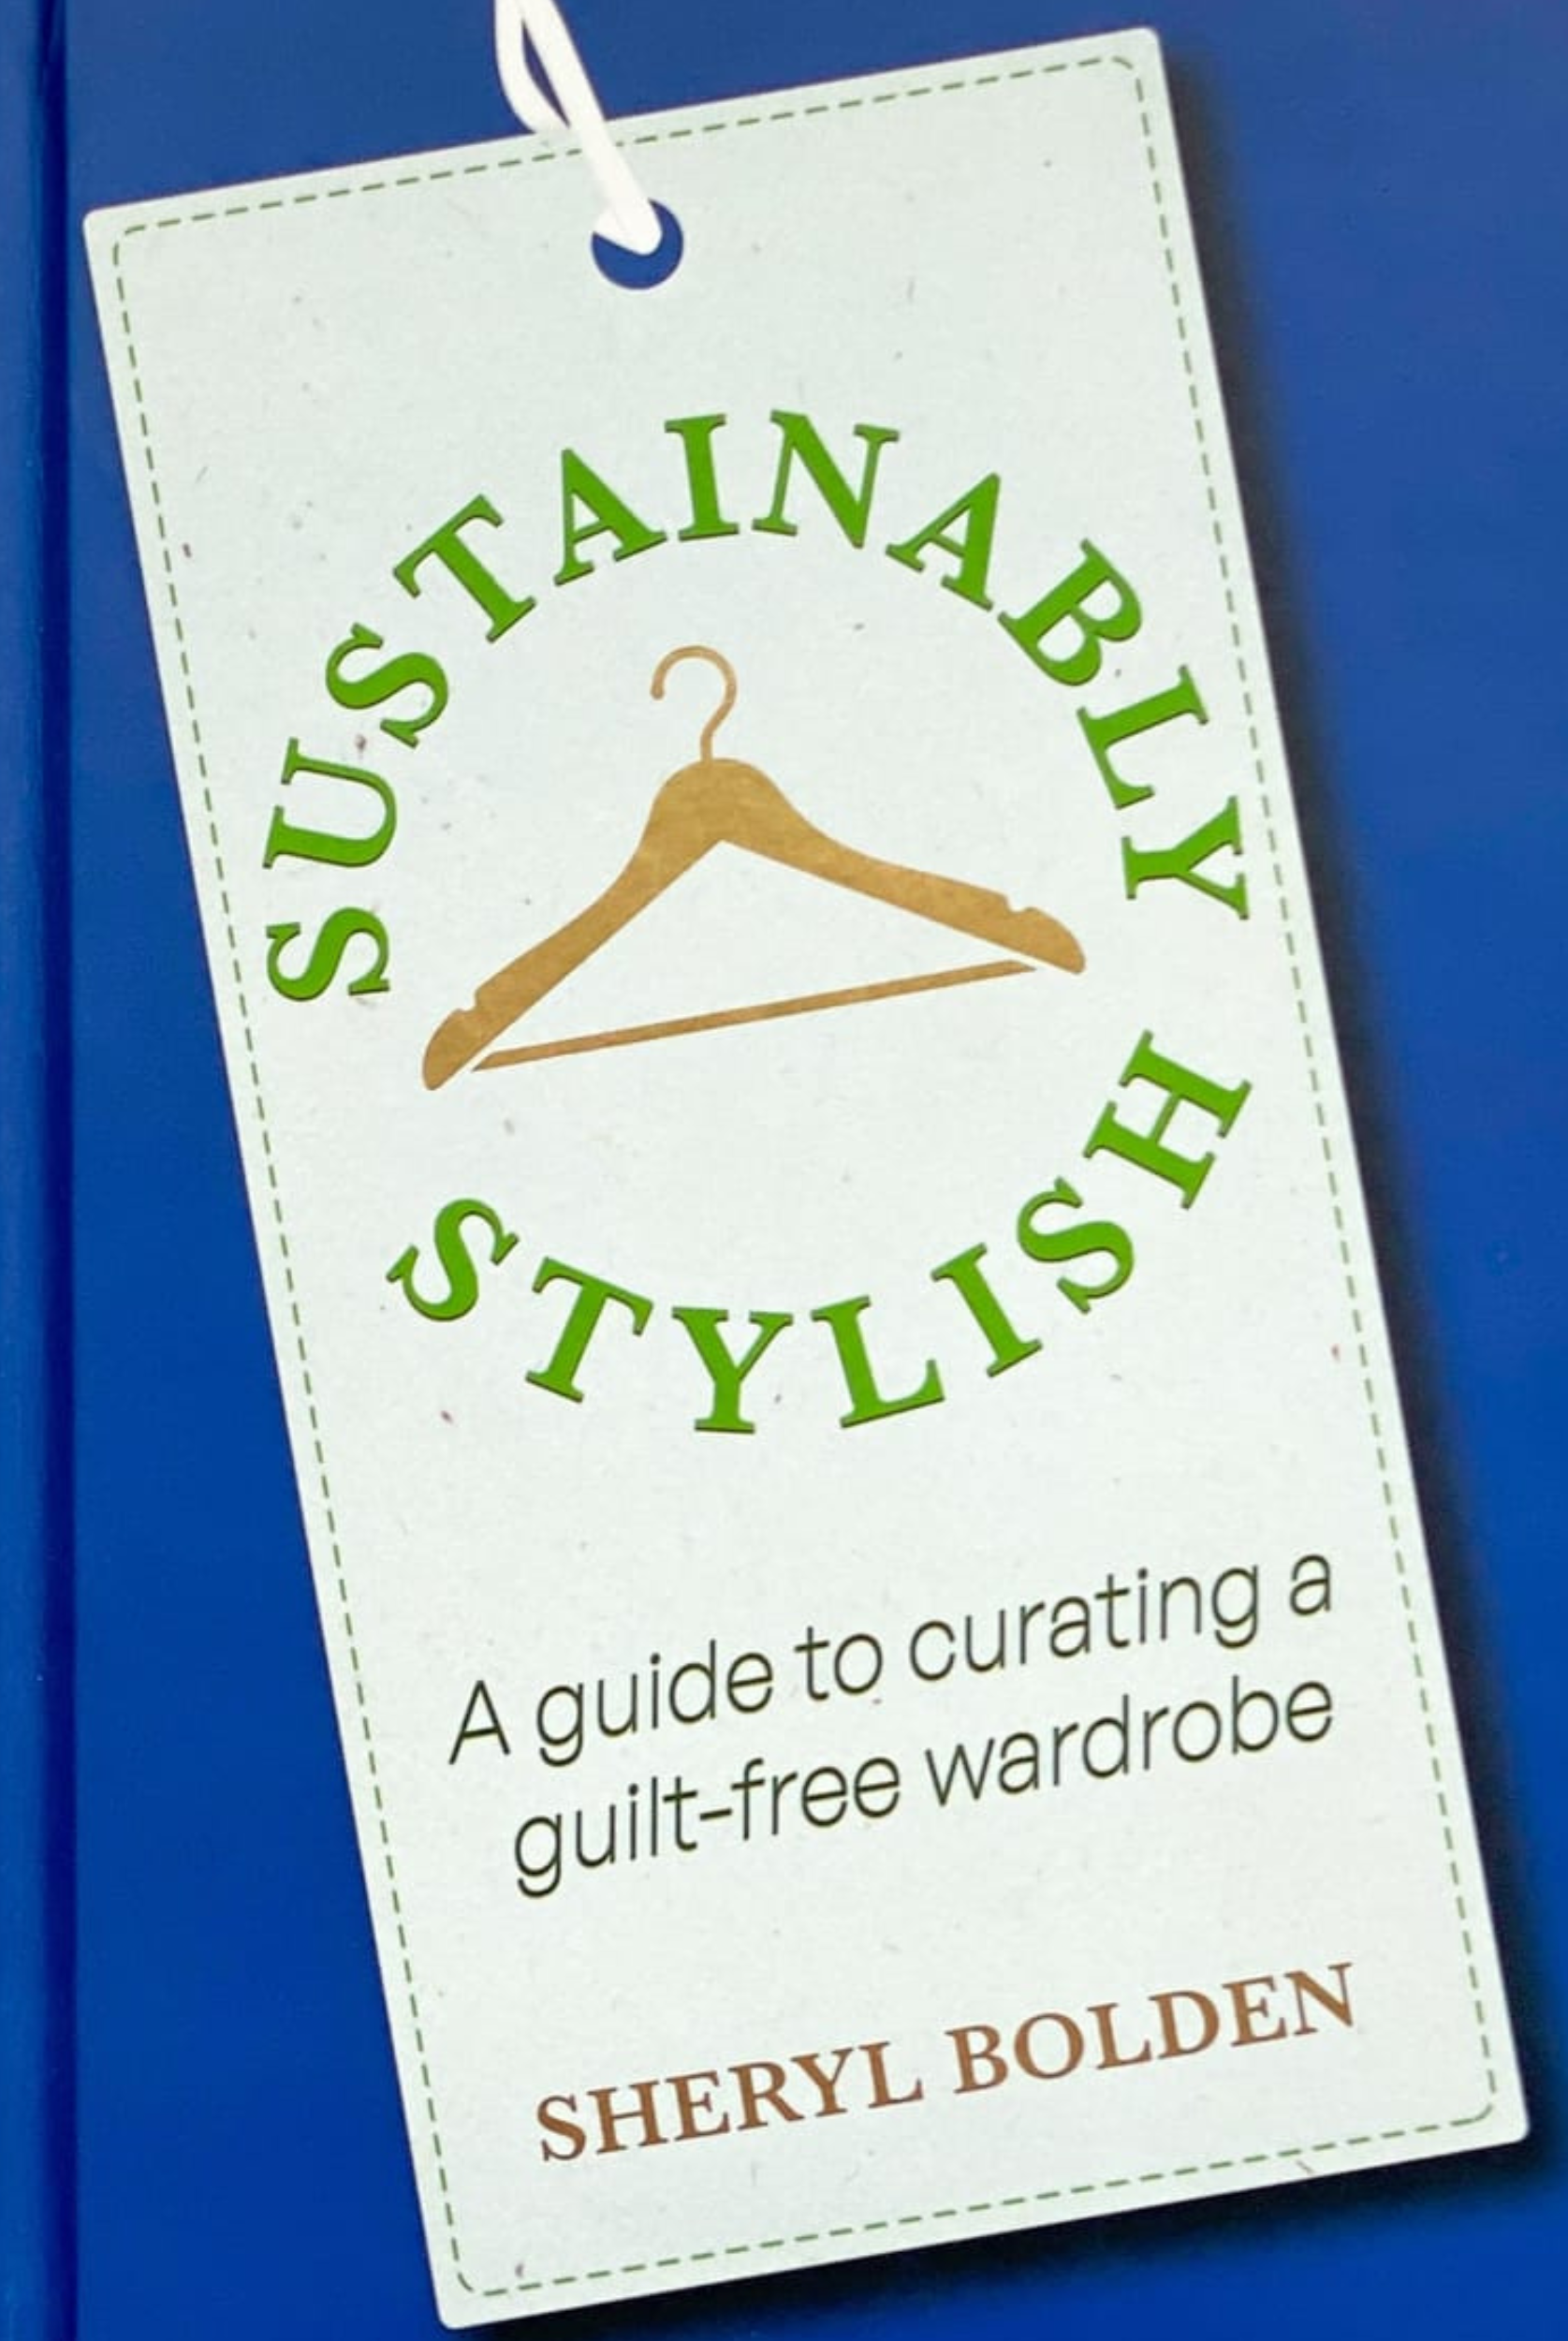 The Front cover of the book sustainably stylish